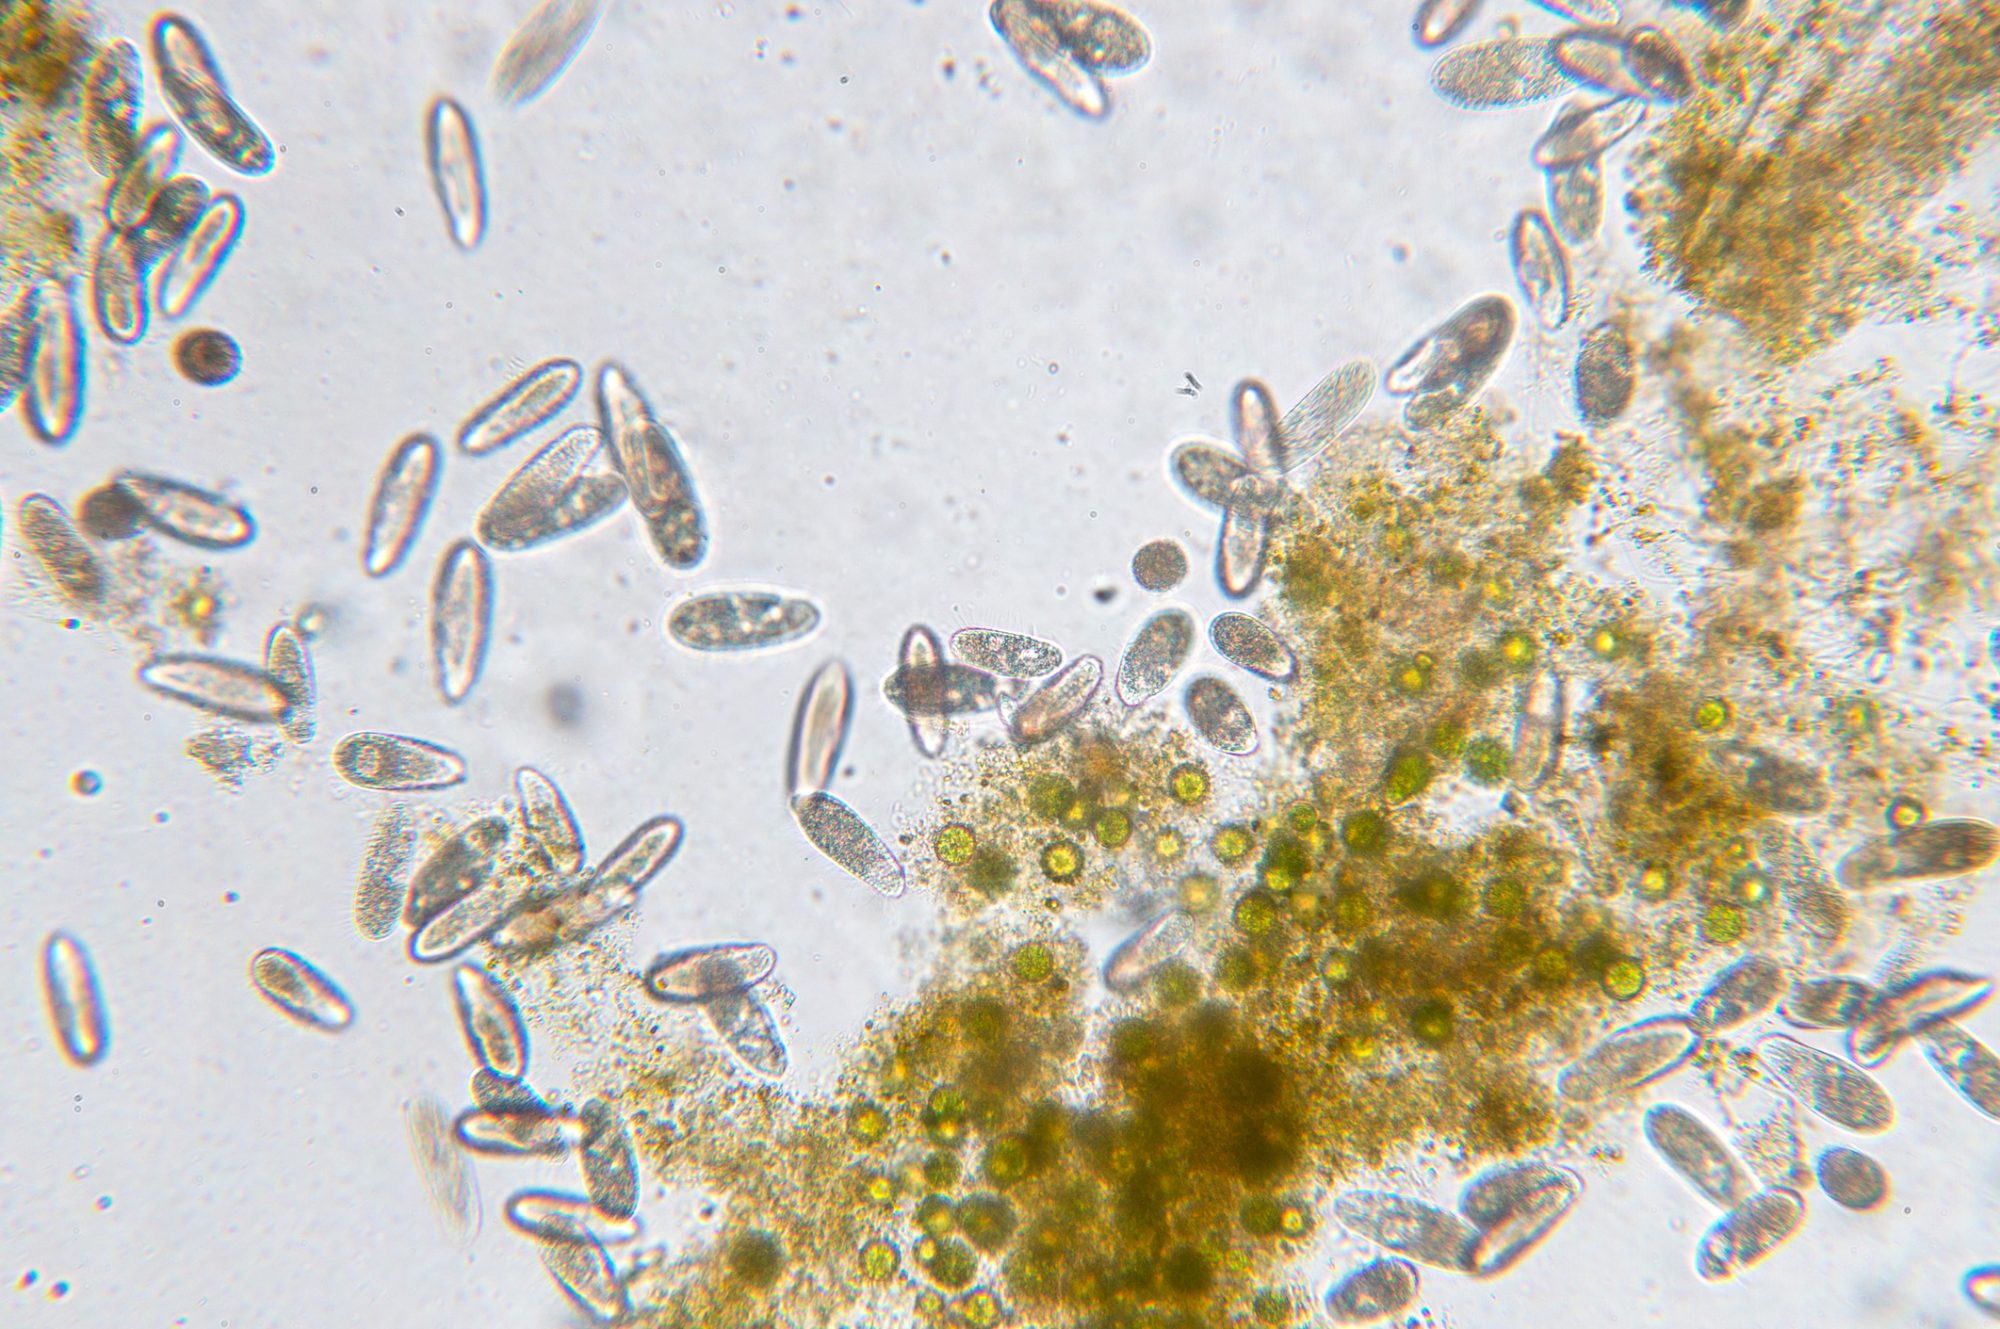 Tetrahymena is a genus of unicellular ciliated protozoan and Bacterium under the microscope